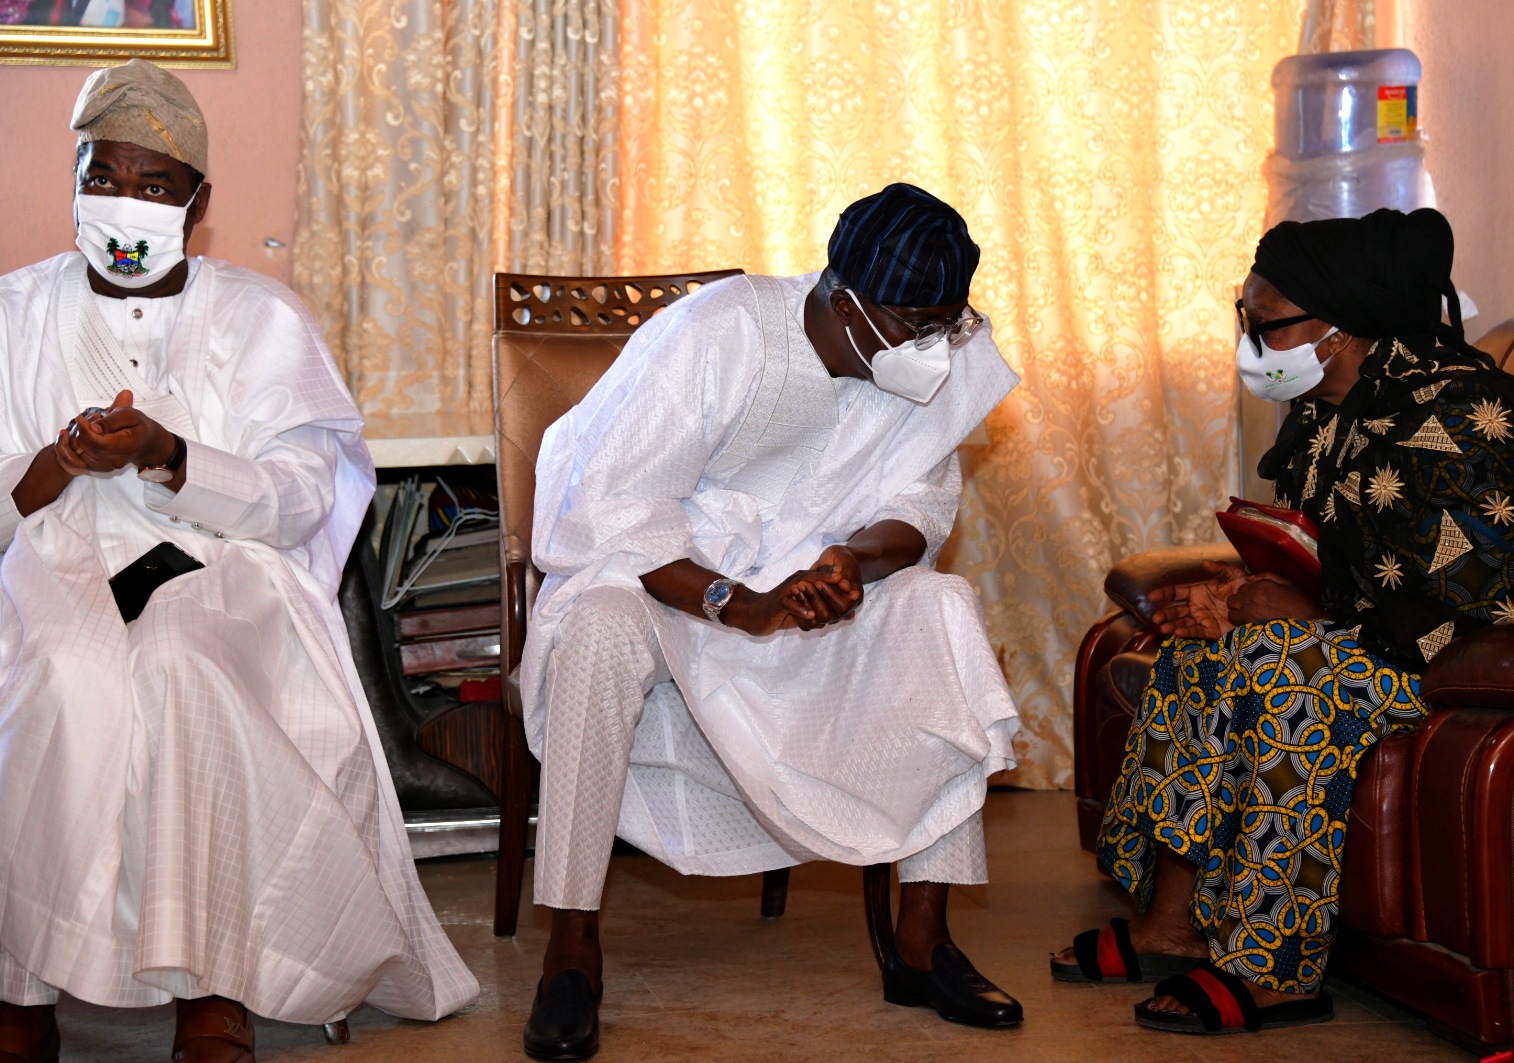 L-R: Lagos State Deputy Governor, Dr. Obafemi Hamzat; Governor Babajide Sanwo-Olu and wife of the deceased, Mrs. Jumoke Rasak, during a condolence visit to the family of late Chief Lanre Razak, on Sunday, August 16, 2020.